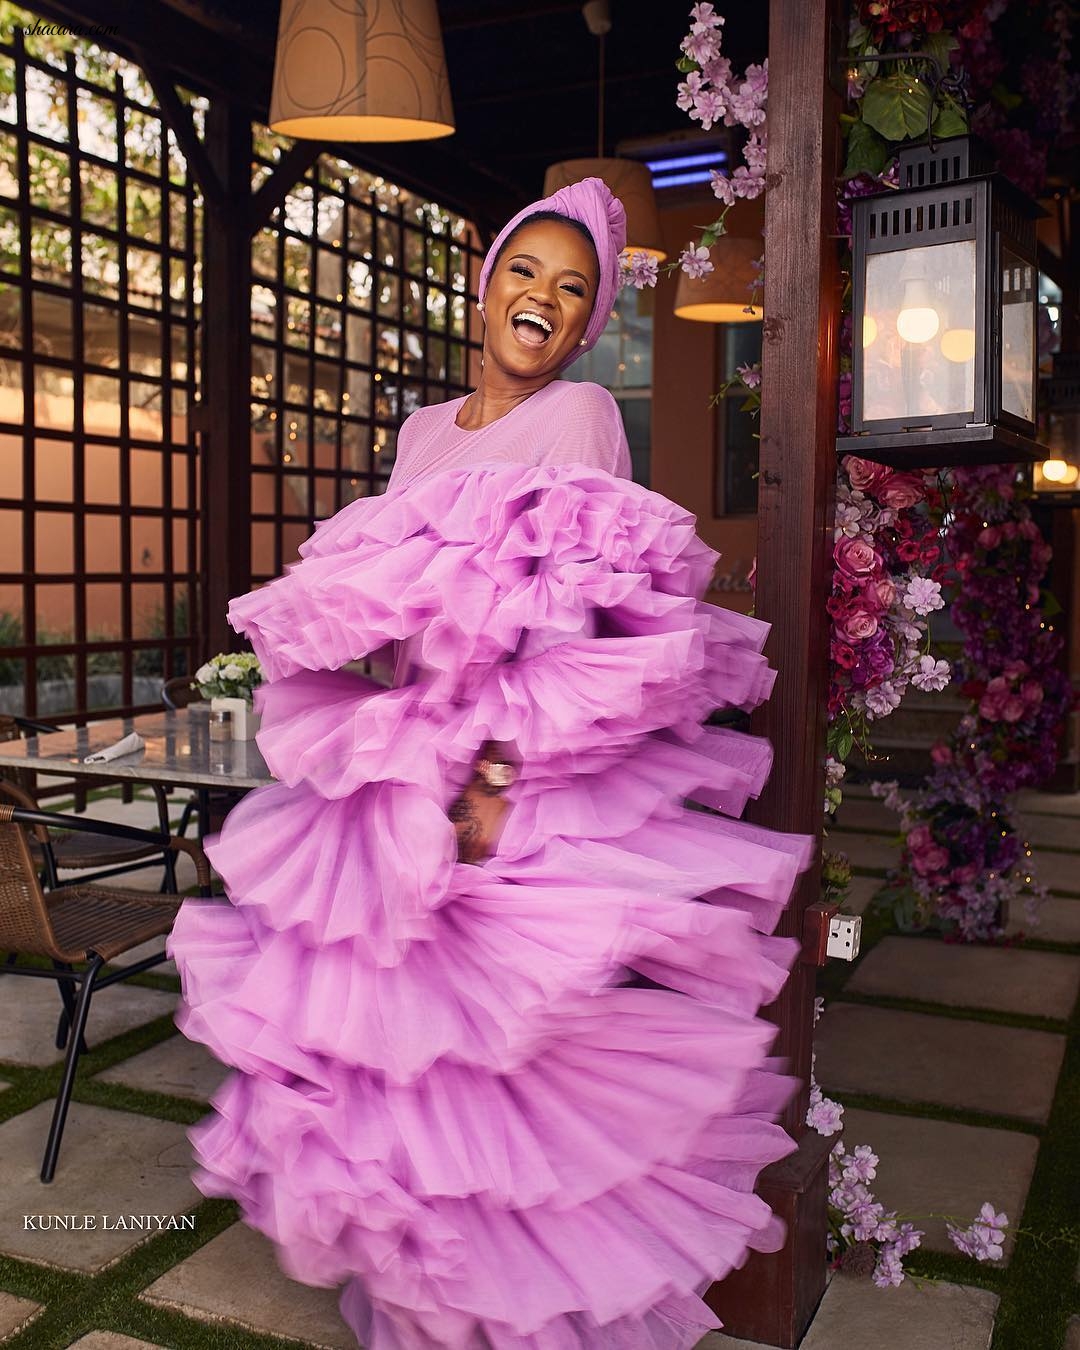 Hauwa Indimi Is A Vision In Pink For Her Alluring New Instagram Shoot